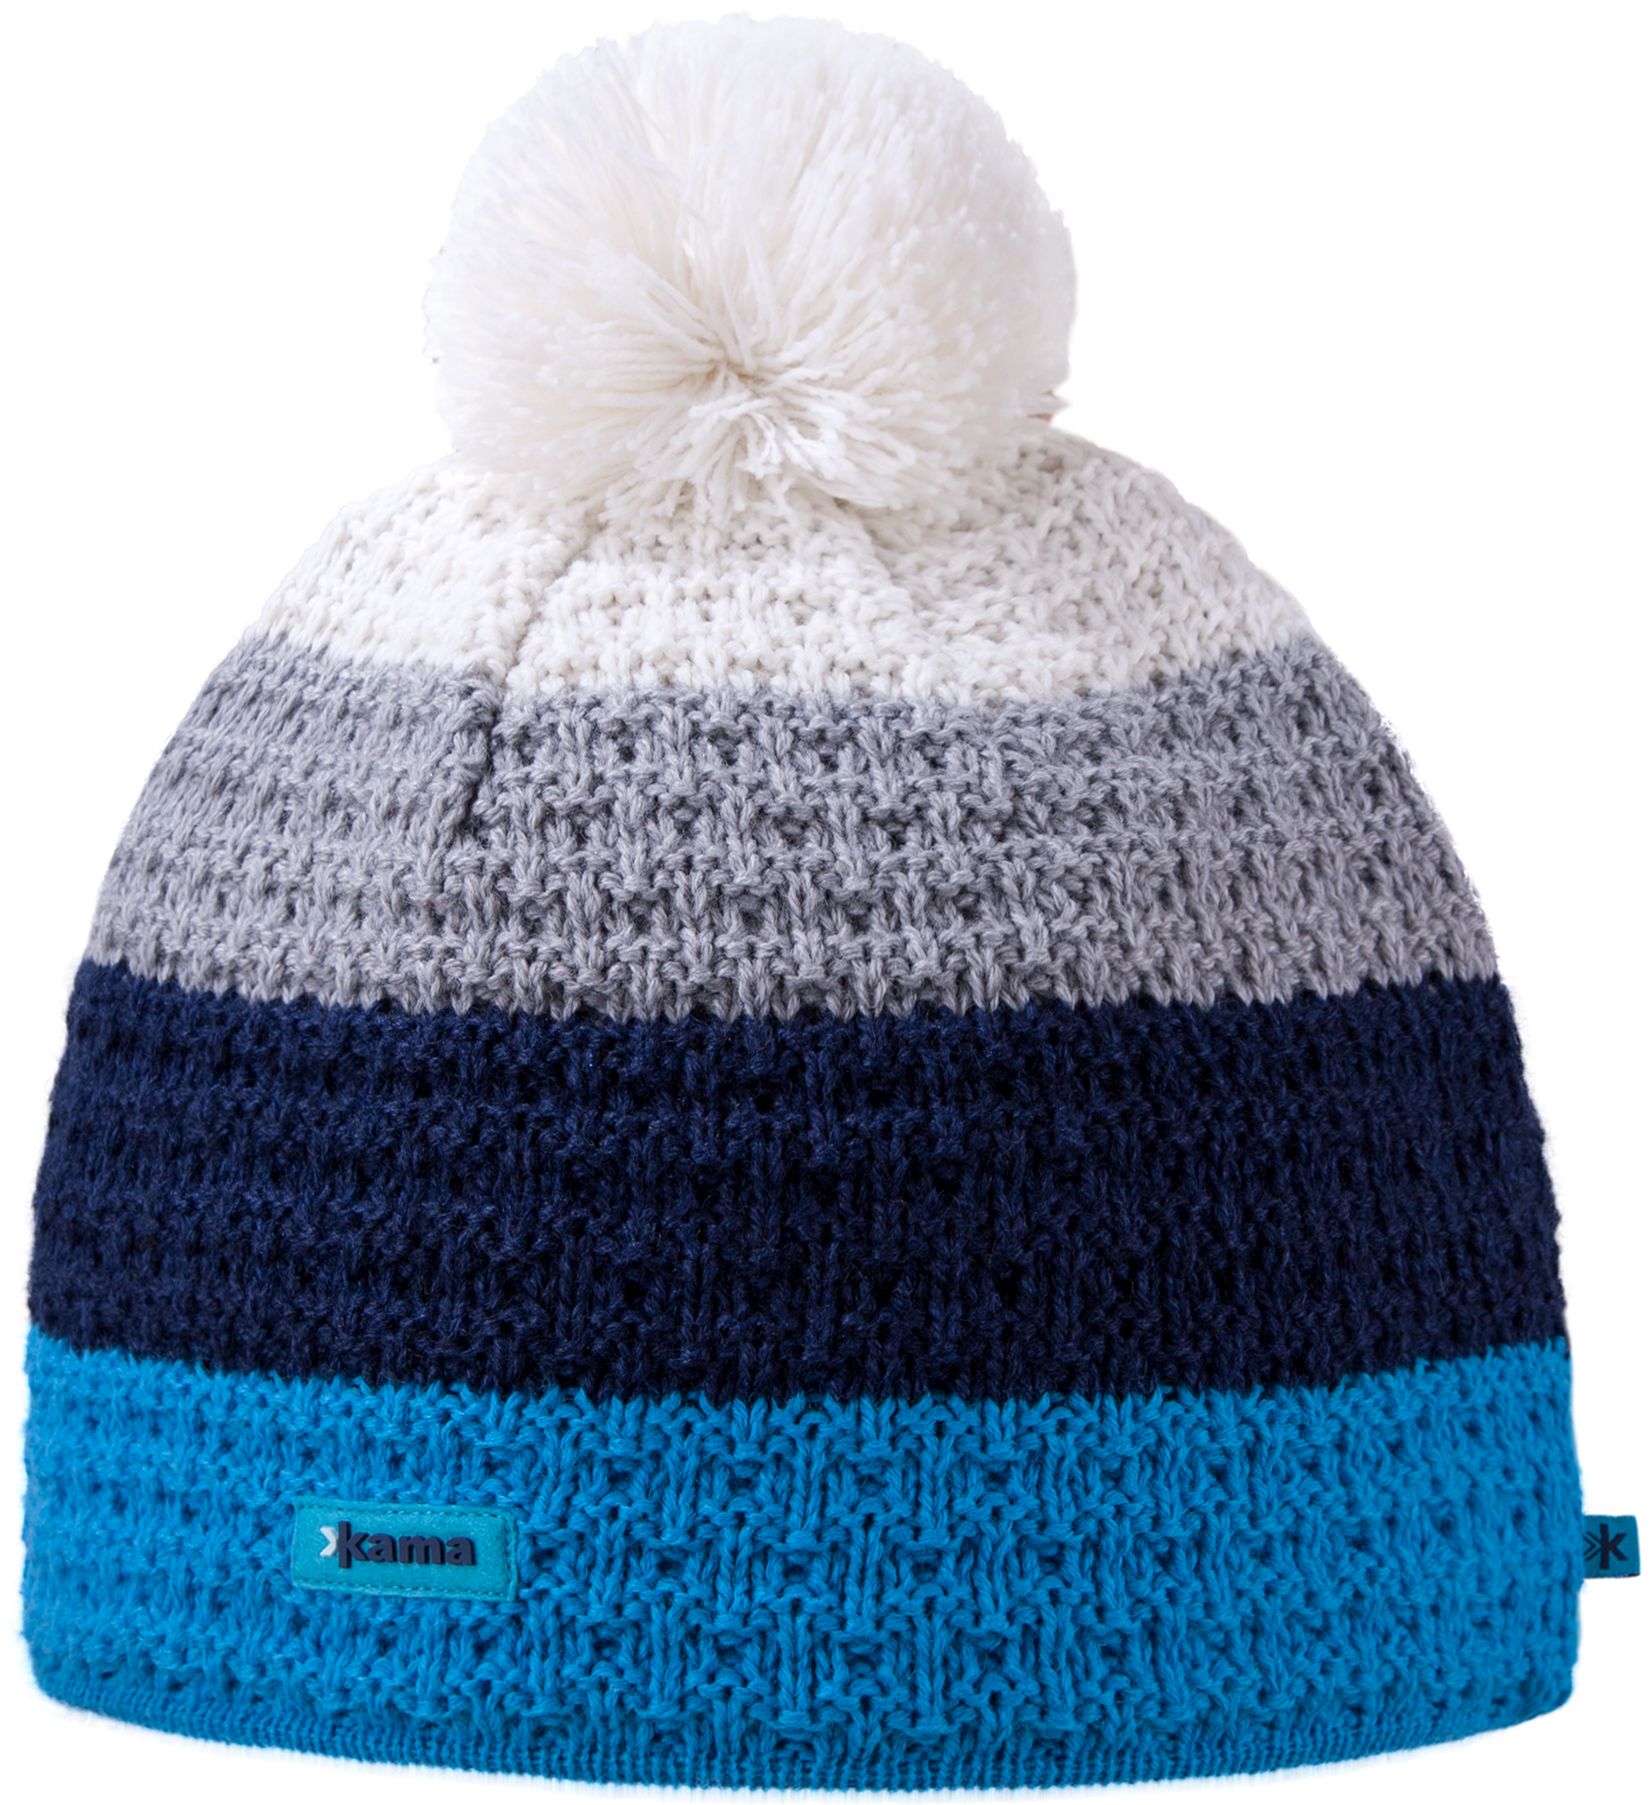 KNITTED HAT - Winter Hat